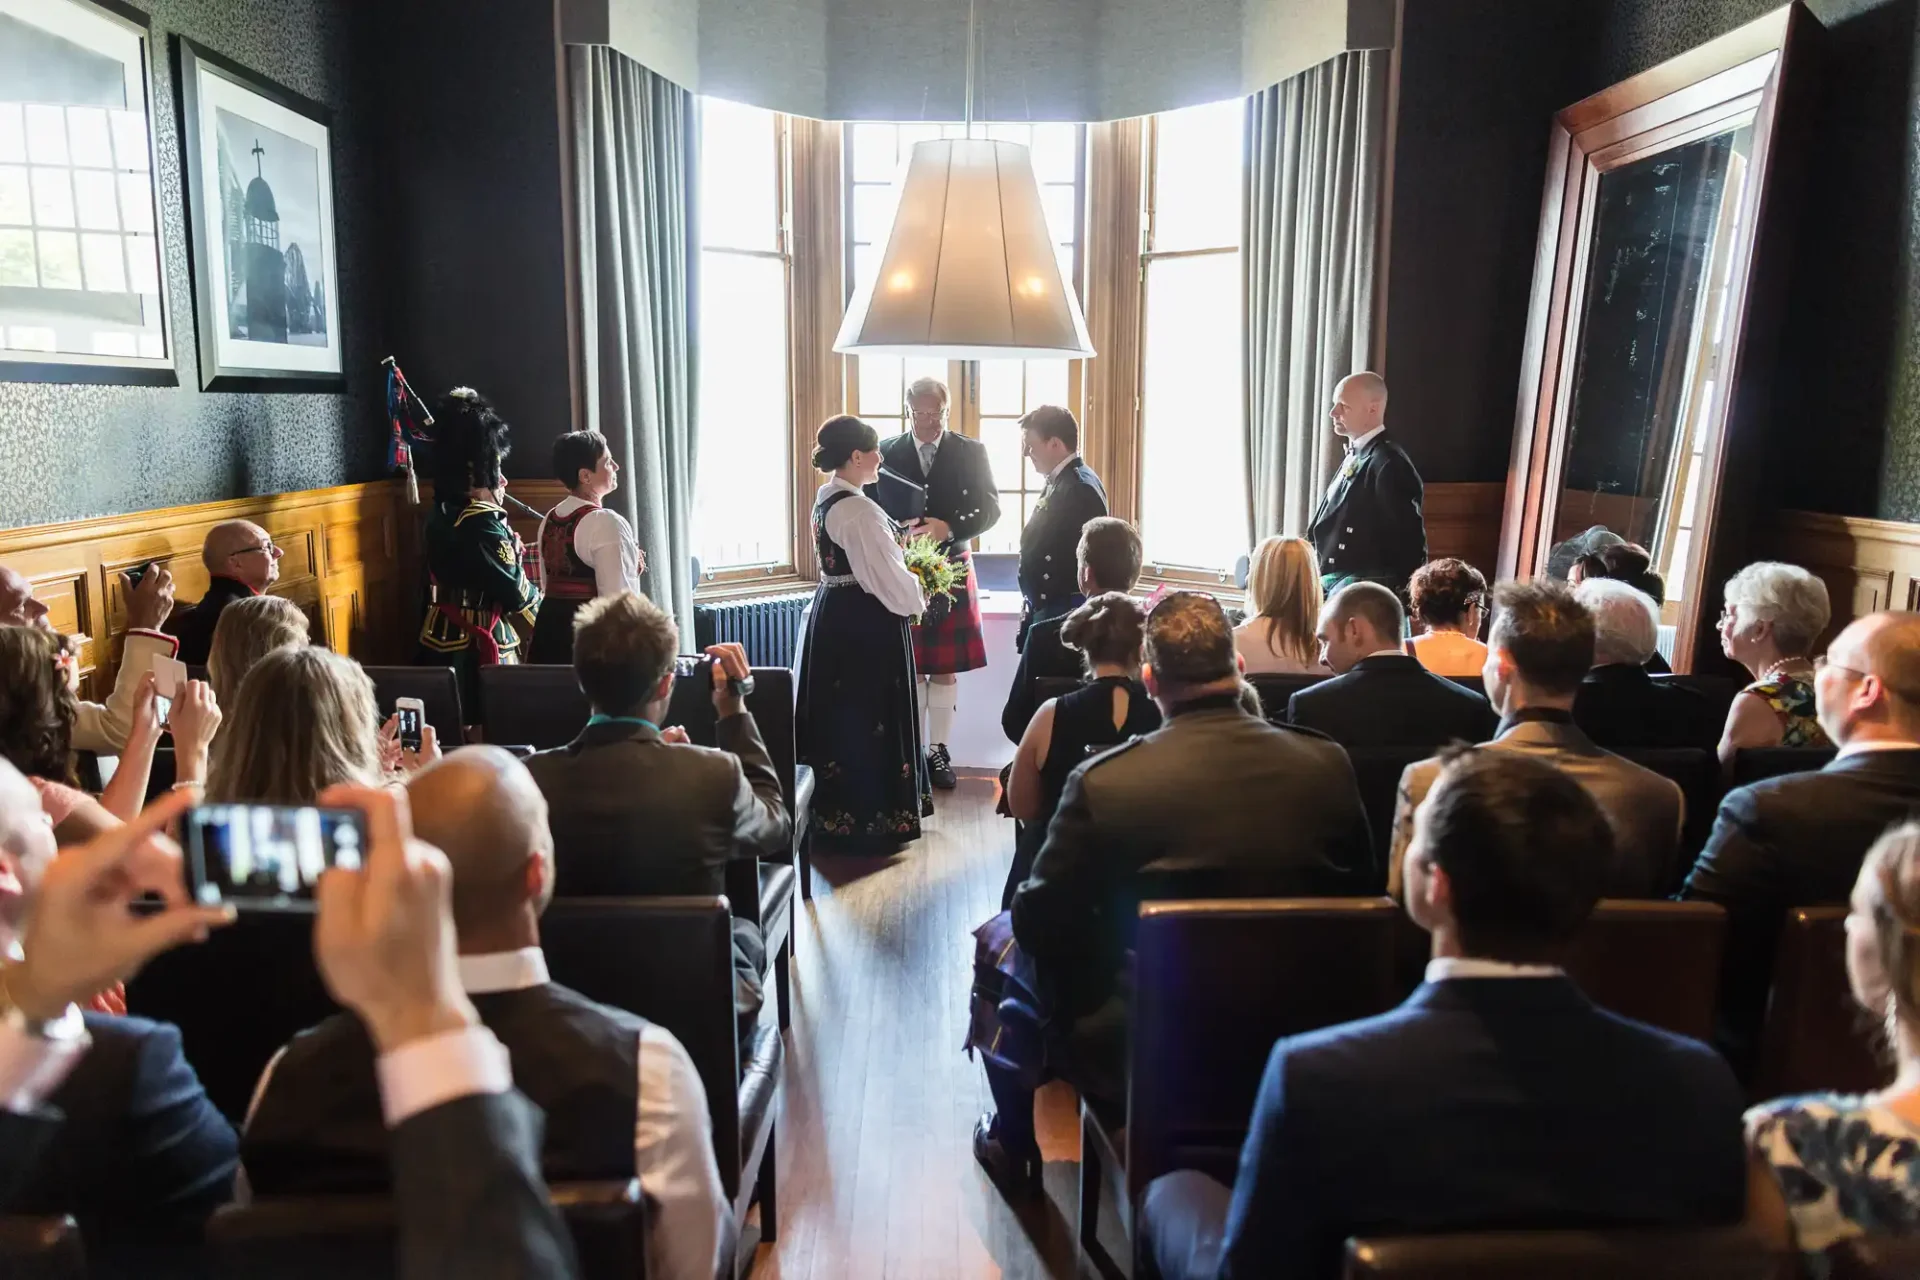 Wedding ceremony in a room with guests watching; bride and groom at the altar with an officiant and a bagpiper in attendance.